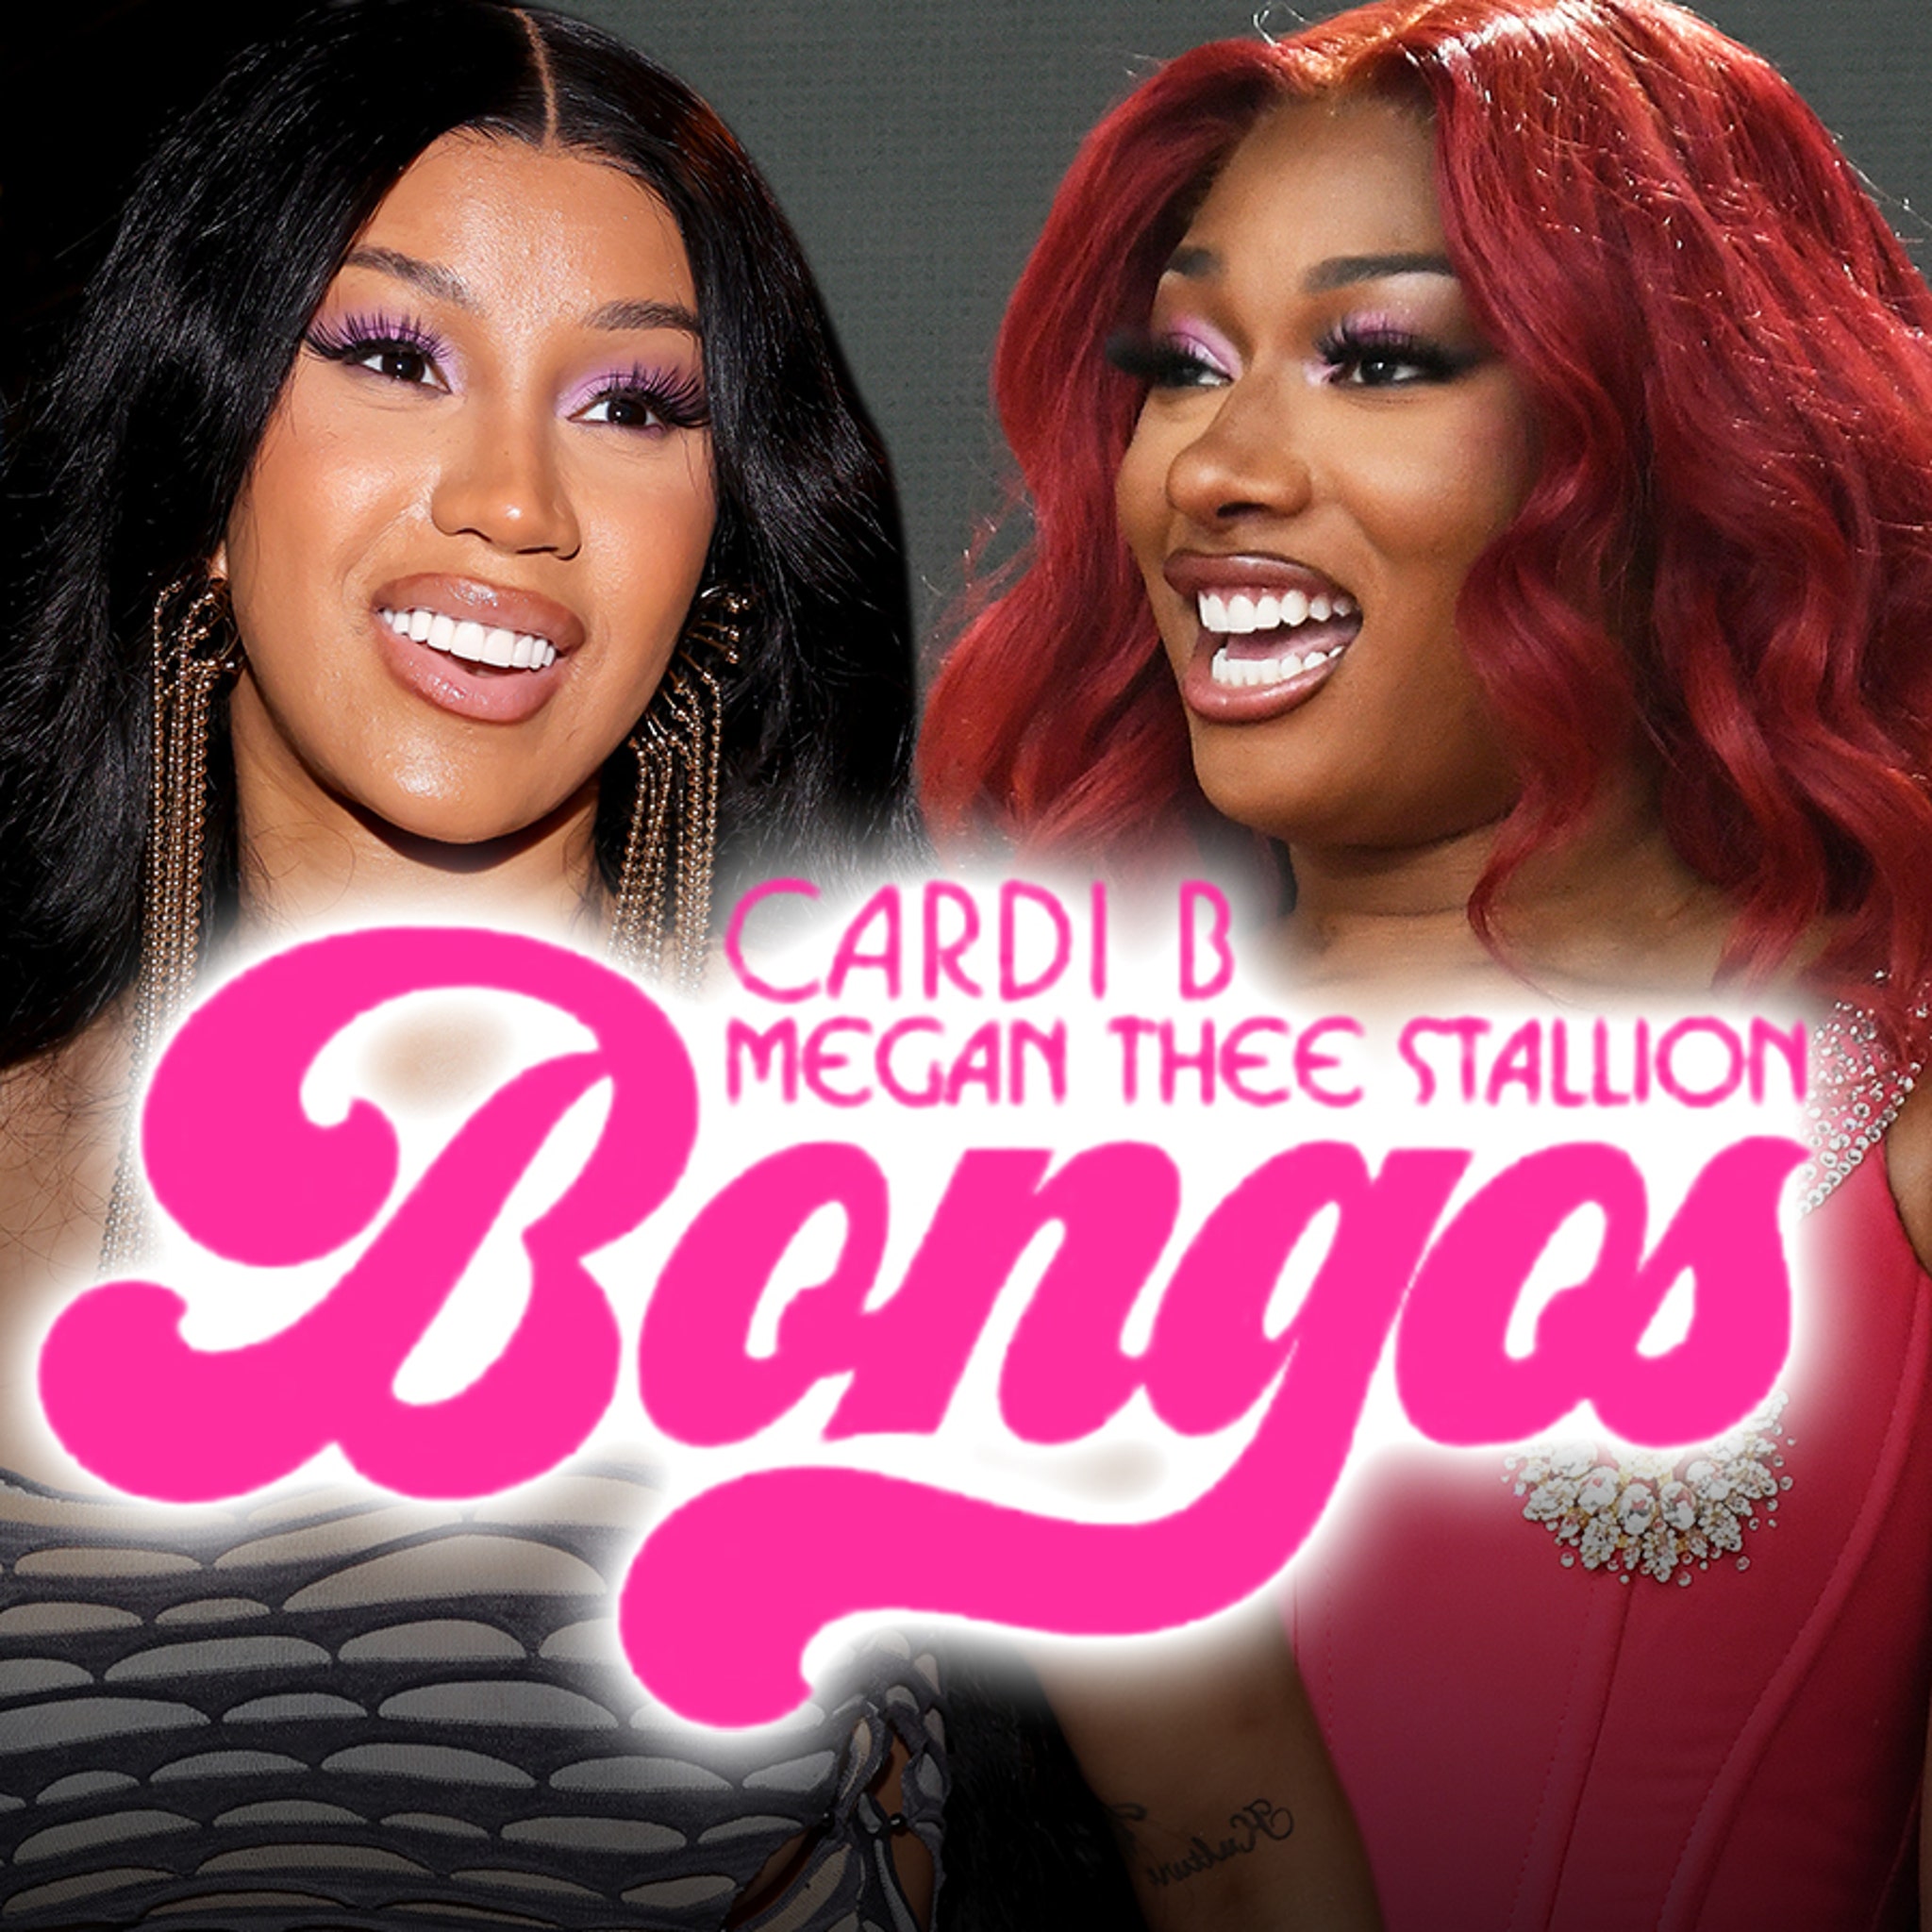 Cardi B And Megan Thee Stallion Announce New Song “Bongos”